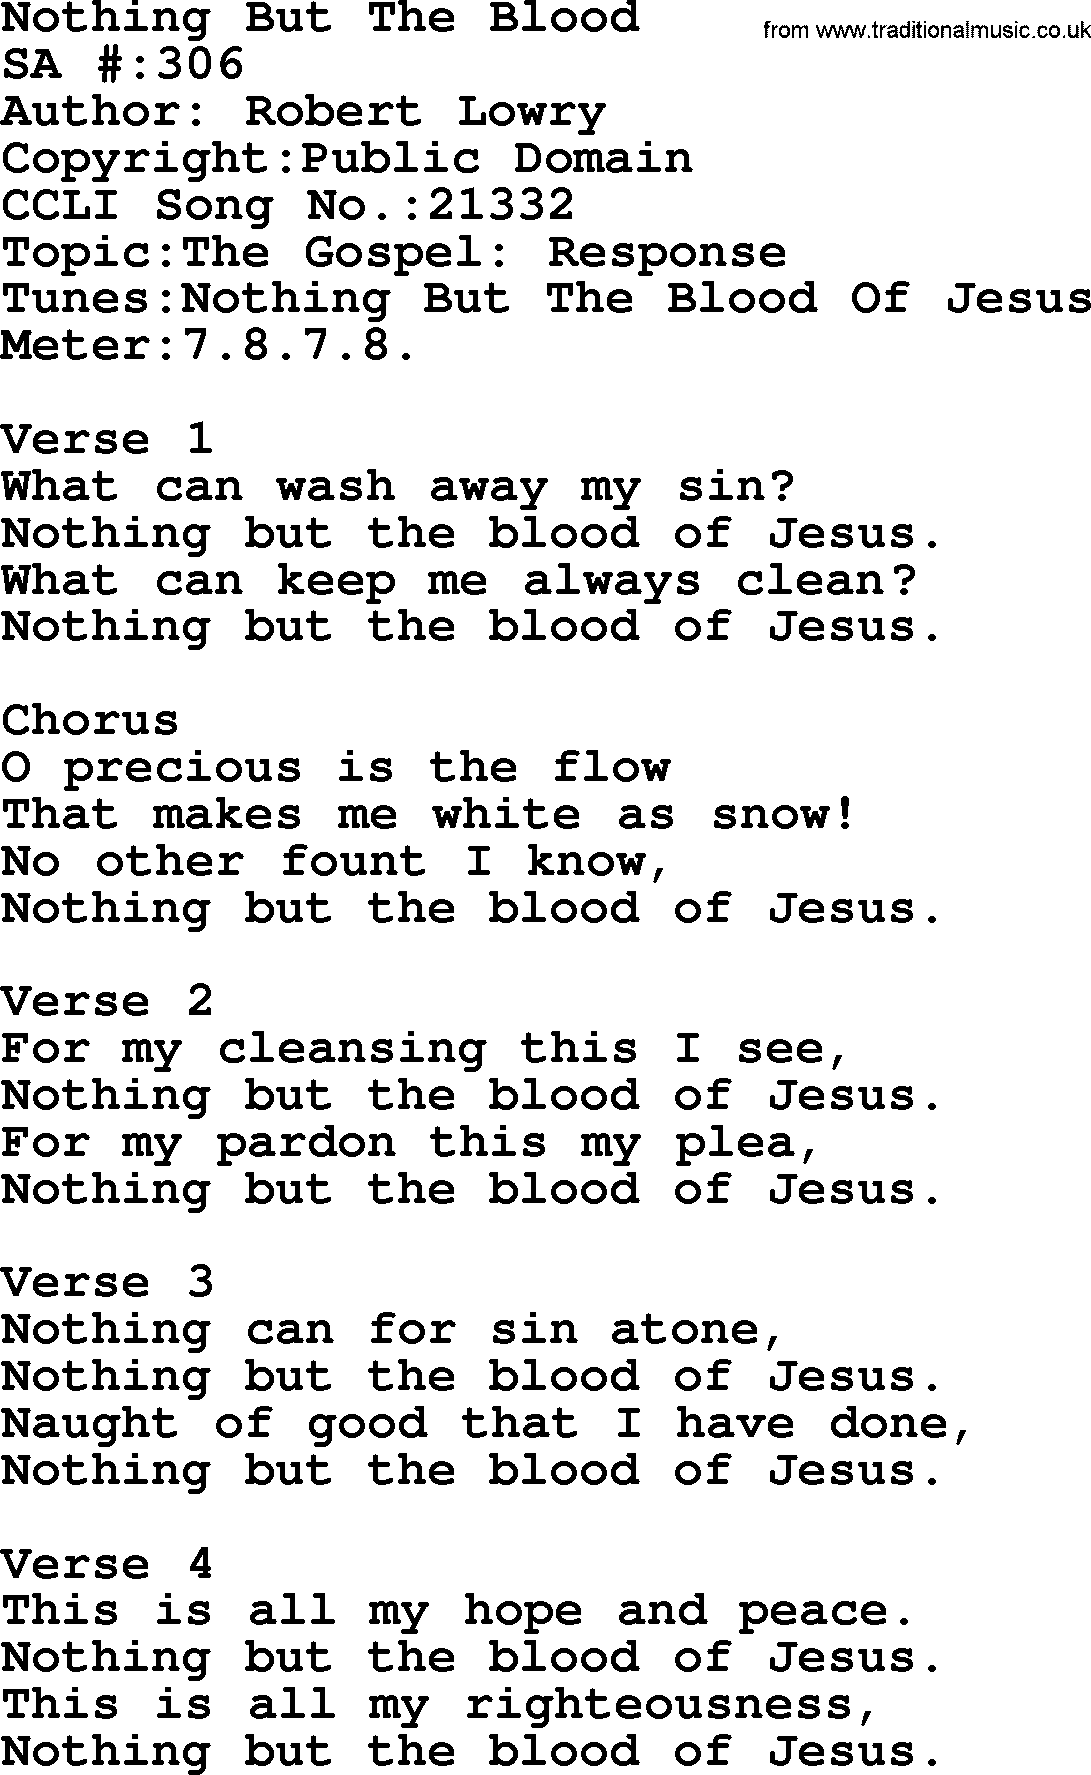 Salvation Army Hymnal, title: Nothing But The Blood, with lyrics and PDF,